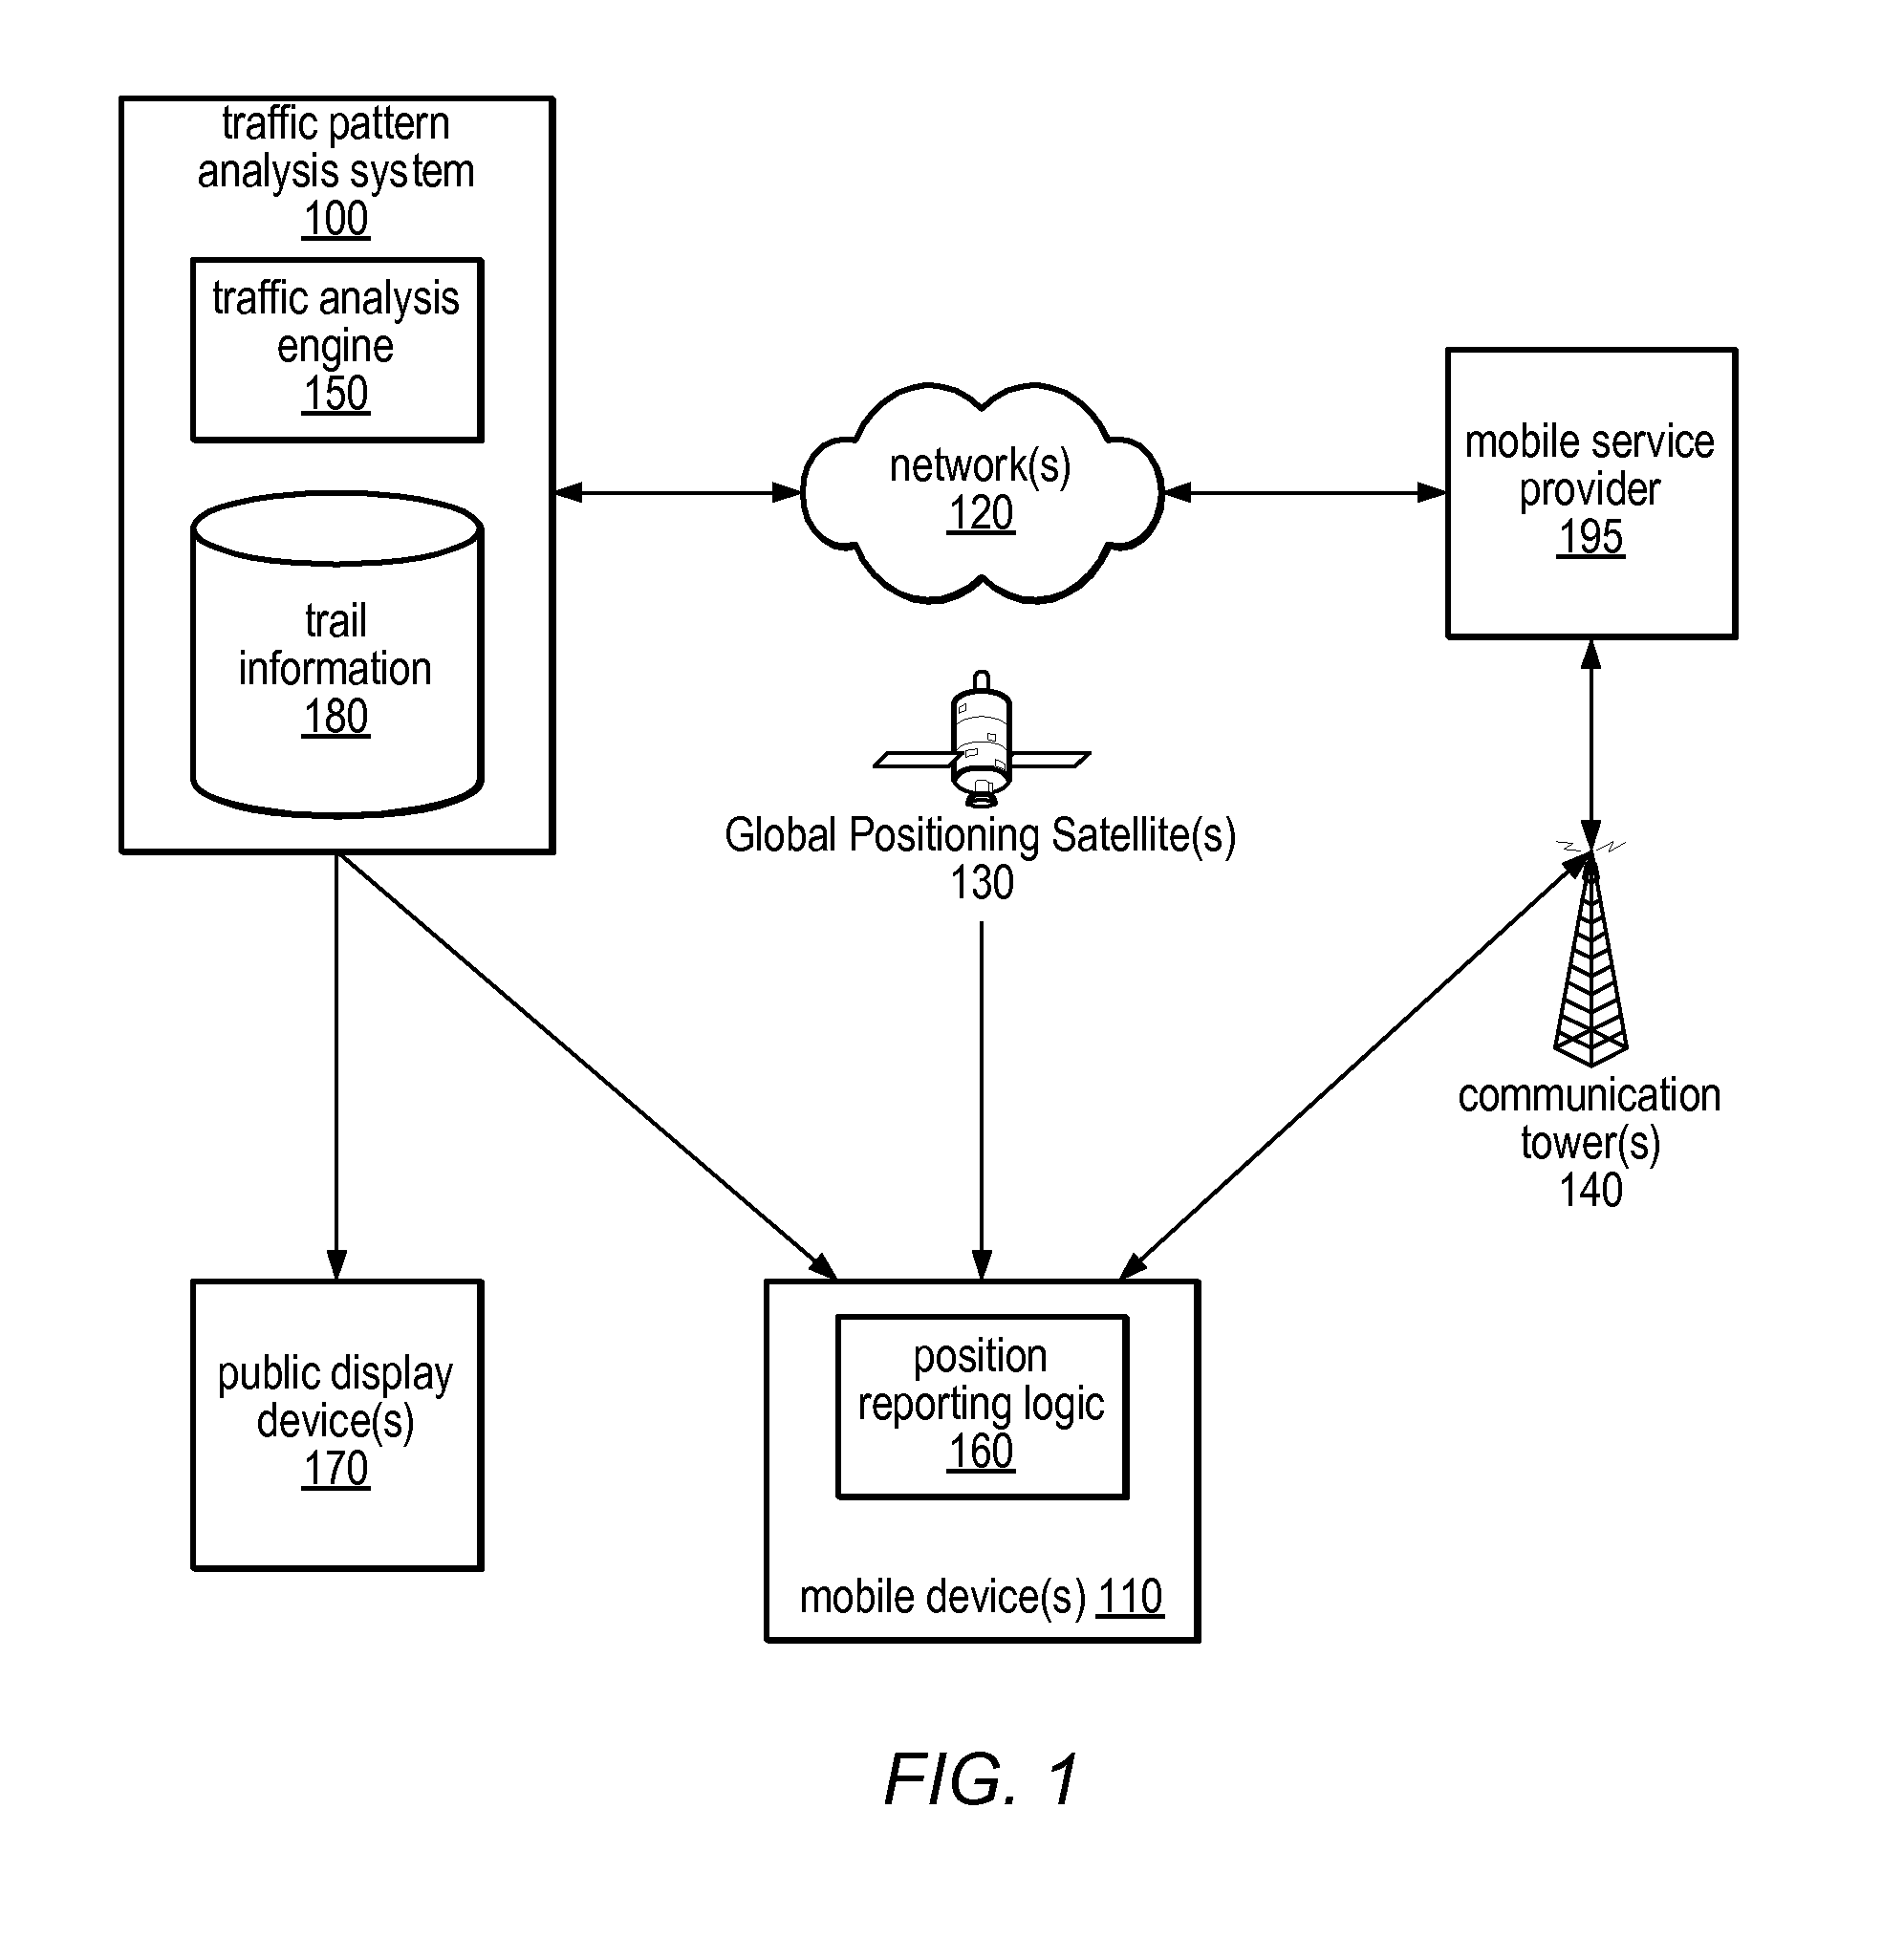 System and method for providing advertisement based on mobile device travel patterns